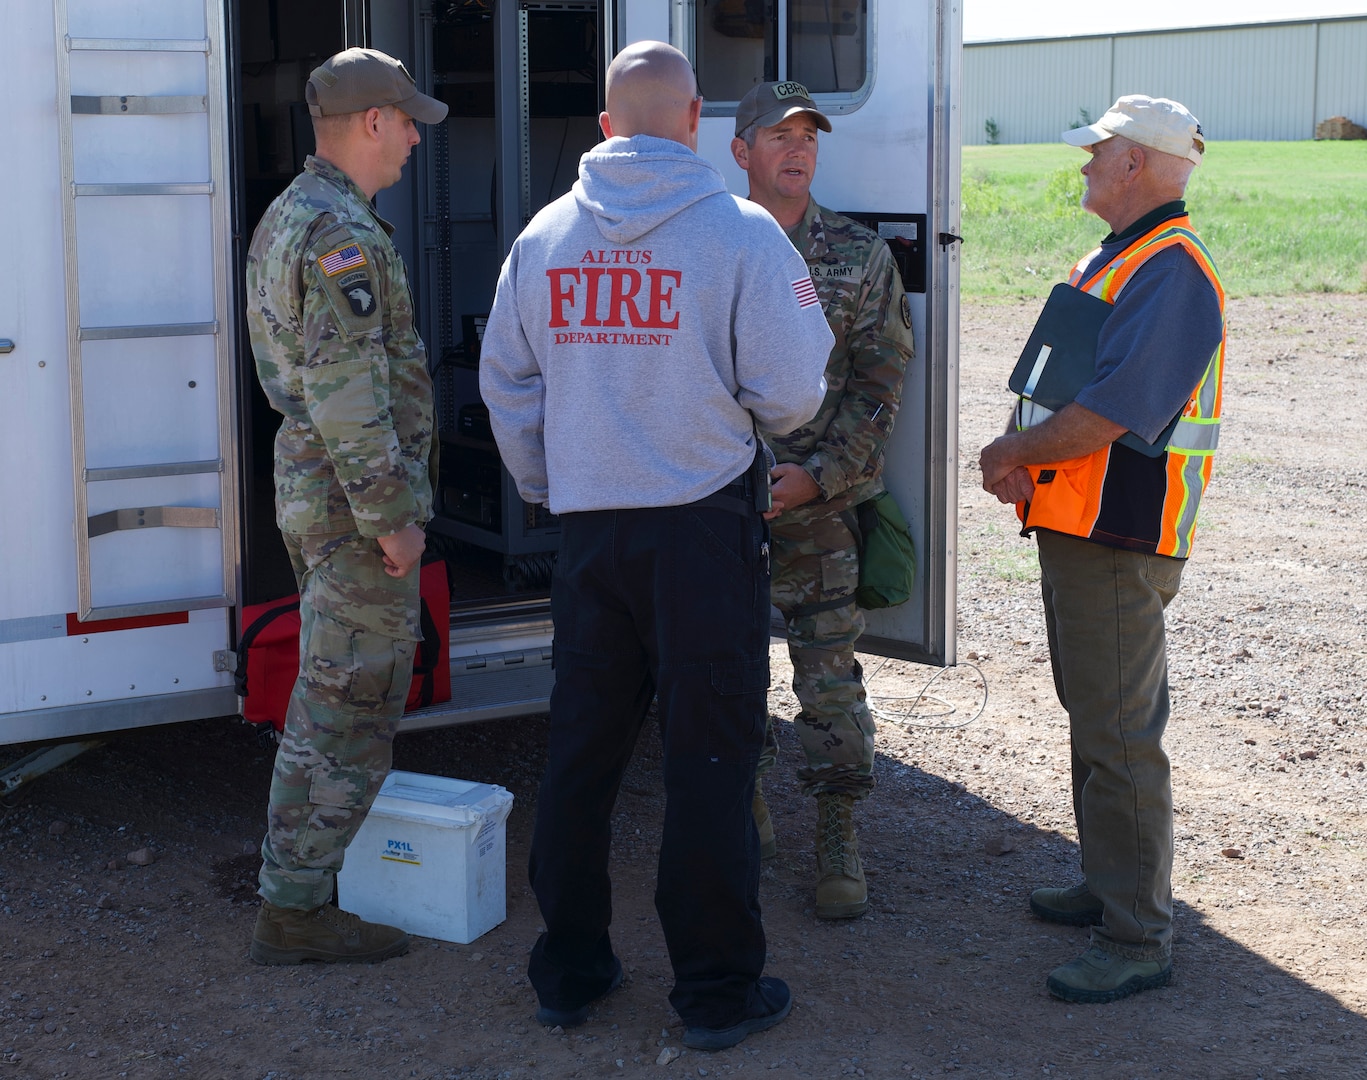 Members of the 63rd Civil Support Team, Oklahoma National Guard, partner with first responders as part of a 72-hour field exercise in Altus, Oklahoma, May 4-6, 2021.

This multi-day training event is one of several exercise scheduled around the state this year designed to test Guard members, emergency management personnel and first responders ability to quickly work to together during natural and man-made disasters. (Oklahoma National Guard photo by Lt. Col. Geoff Legler)